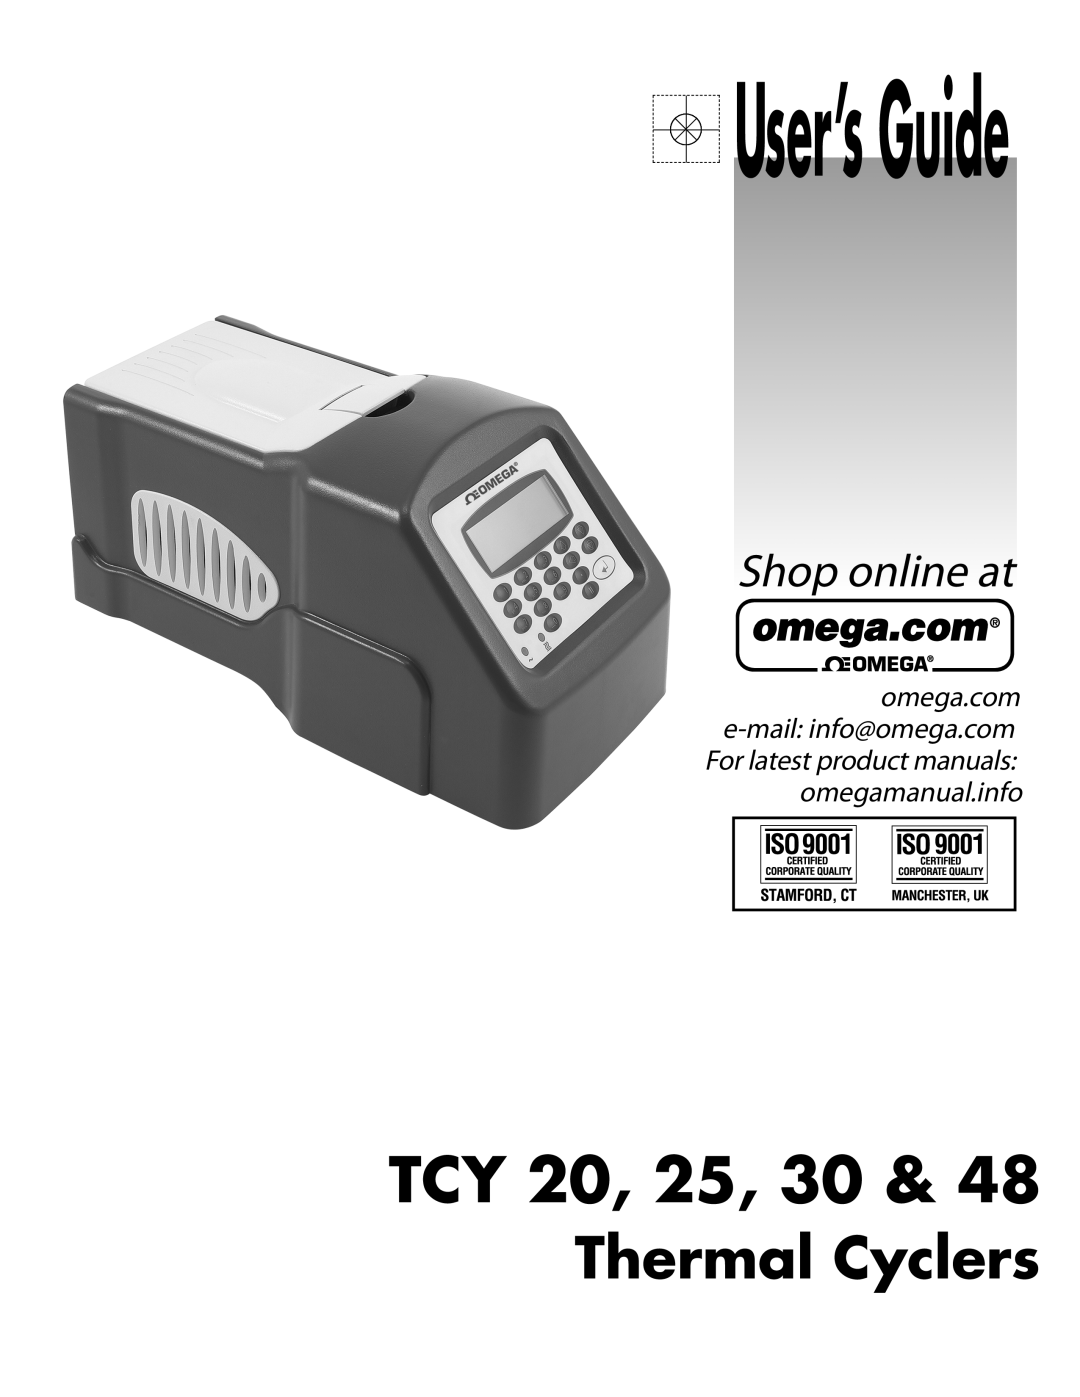 Omega Engineering 48 manual TCY 20, 25, 30, Thermal Cyclers, User’sGuide, Shop online at 